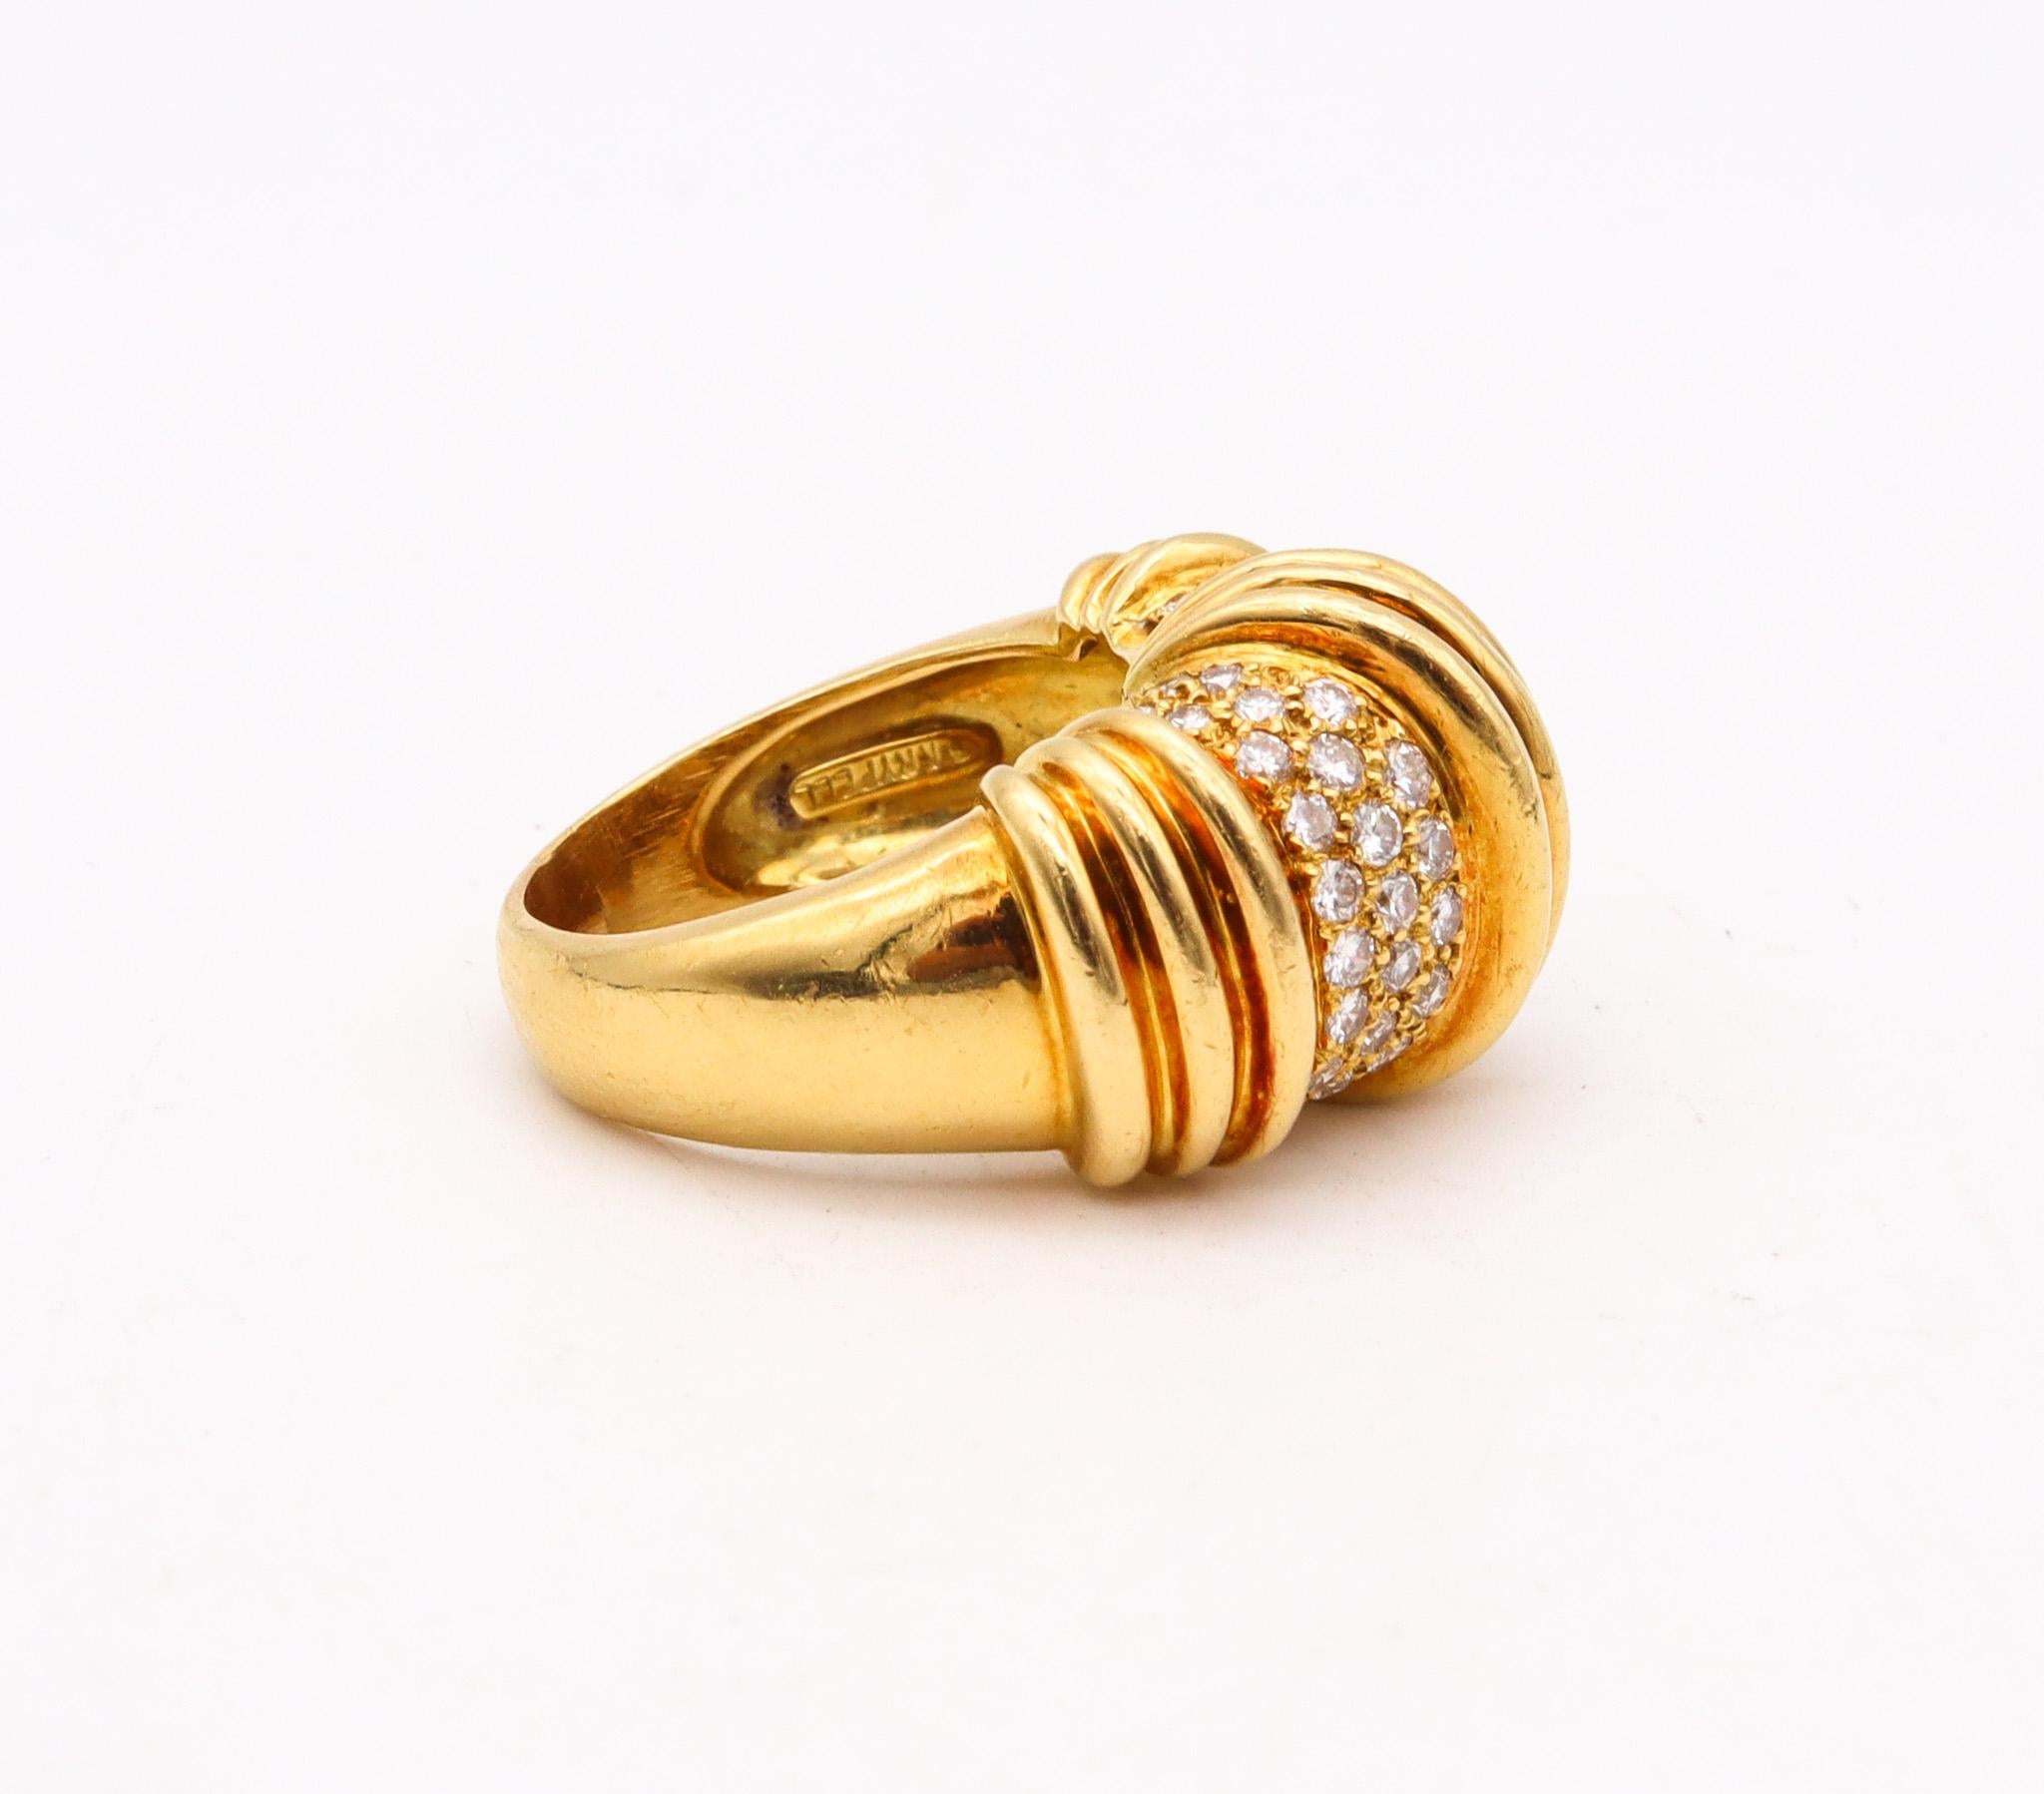 Charles Krypell Modernist Cocktail Ring In 18Kt Gold With 1.08 Cts In Diamonds In Excellent Condition For Sale In Miami, FL